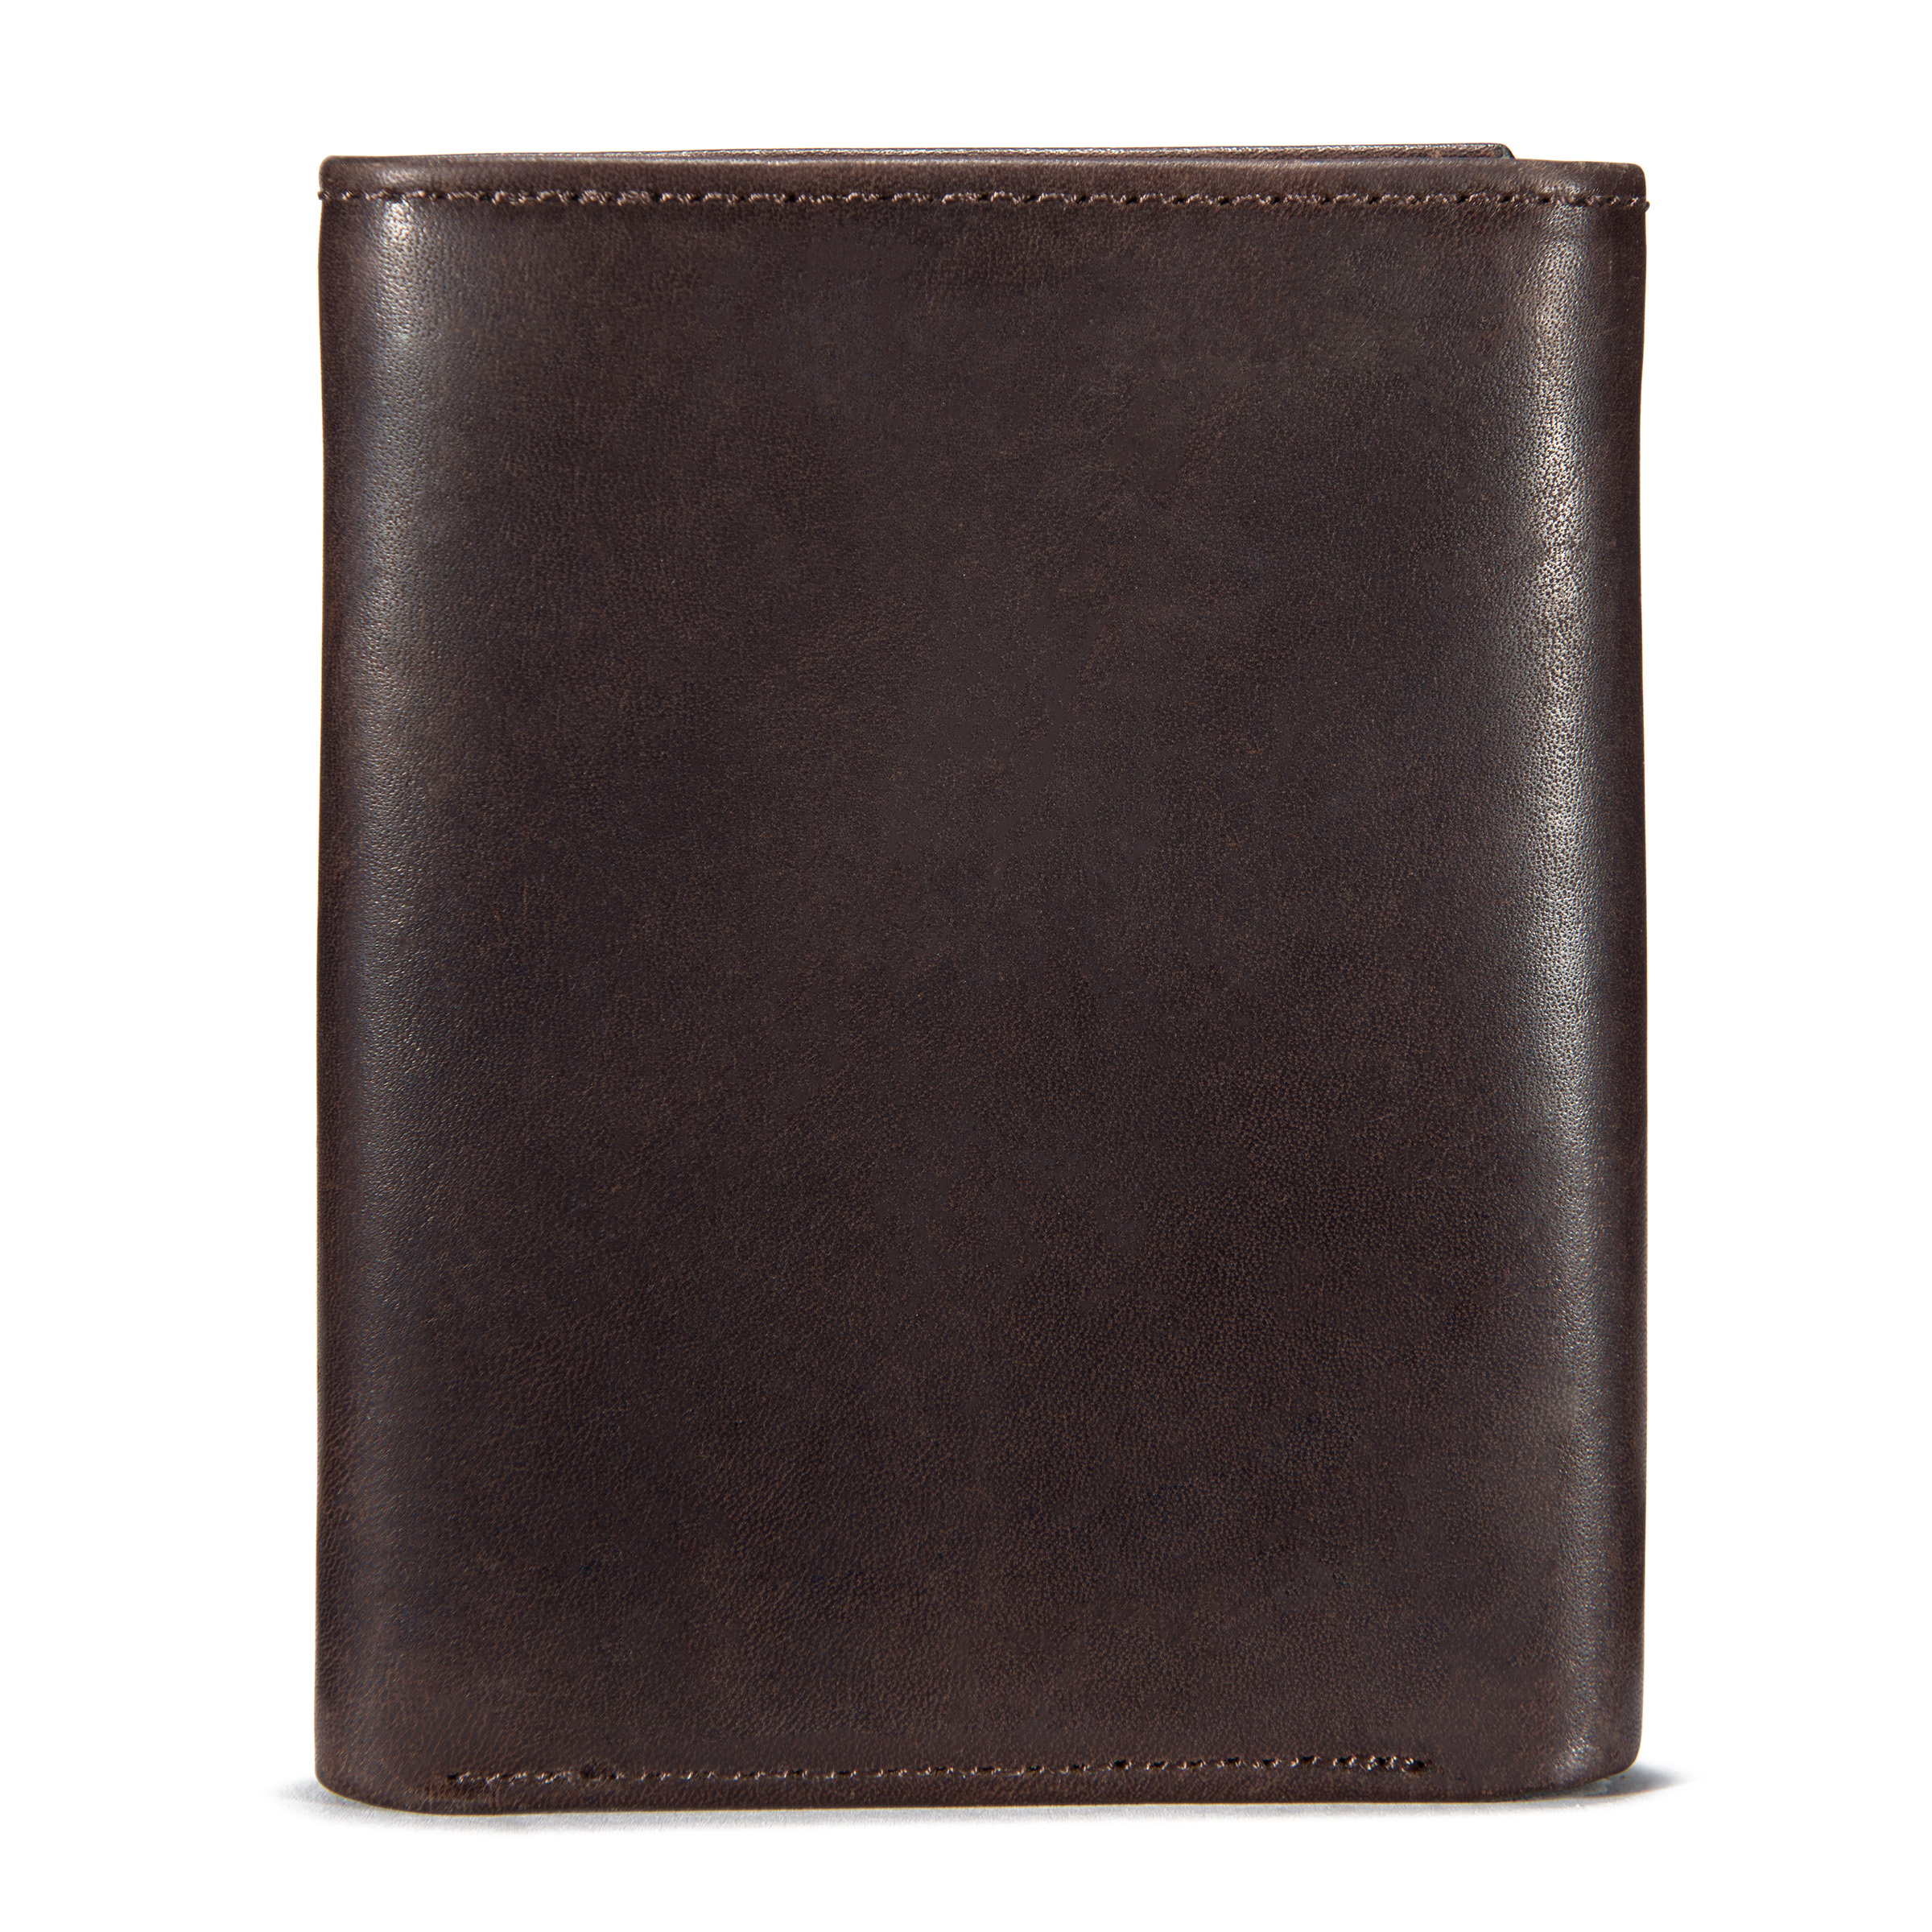 Picture of Carhartt B0000219 Mens Oil Tan Leather Trifold Wallet